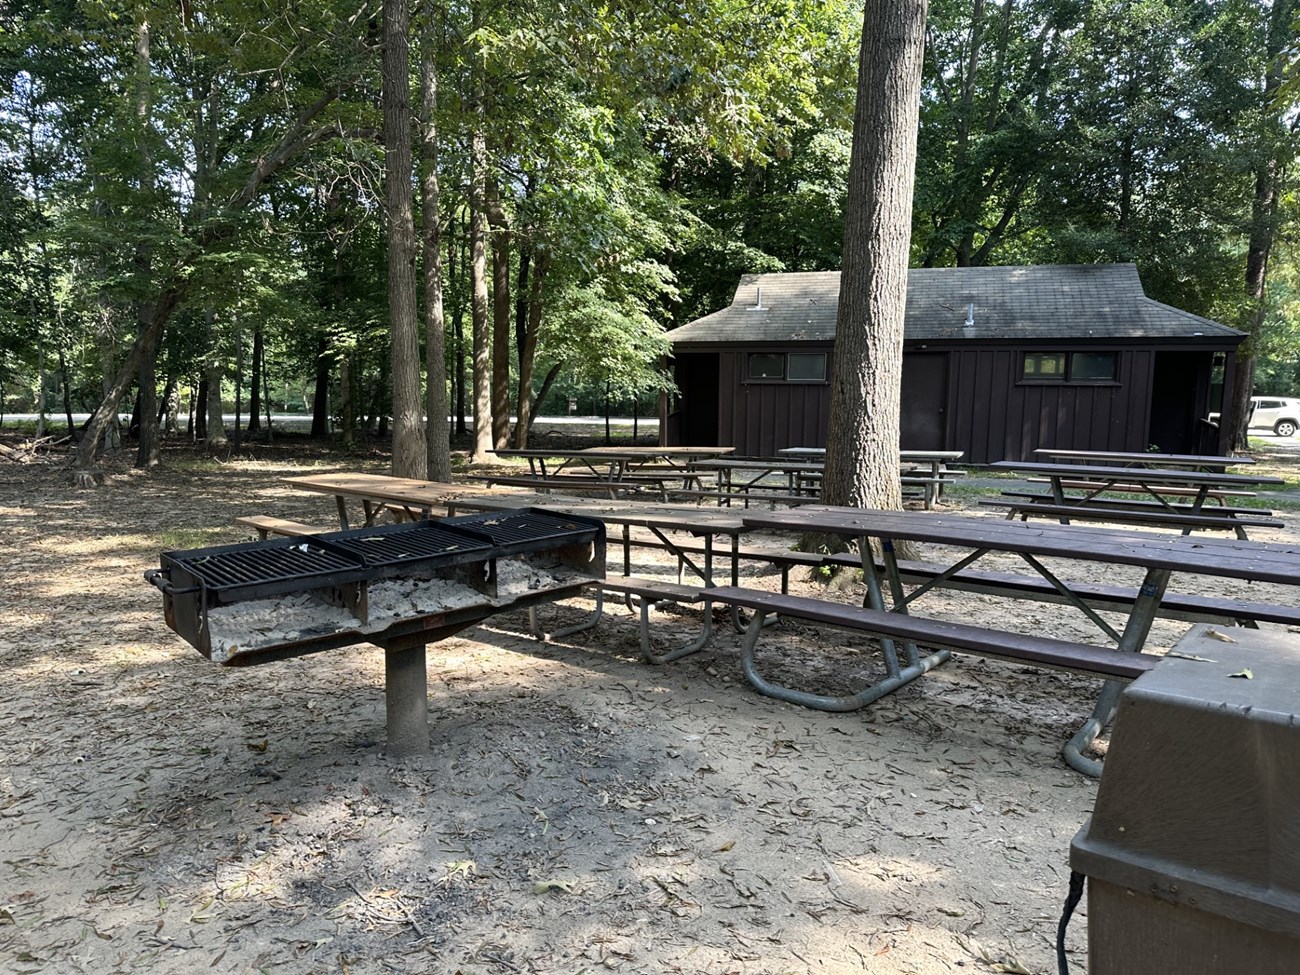 Grills and picnic tables in a forest setting